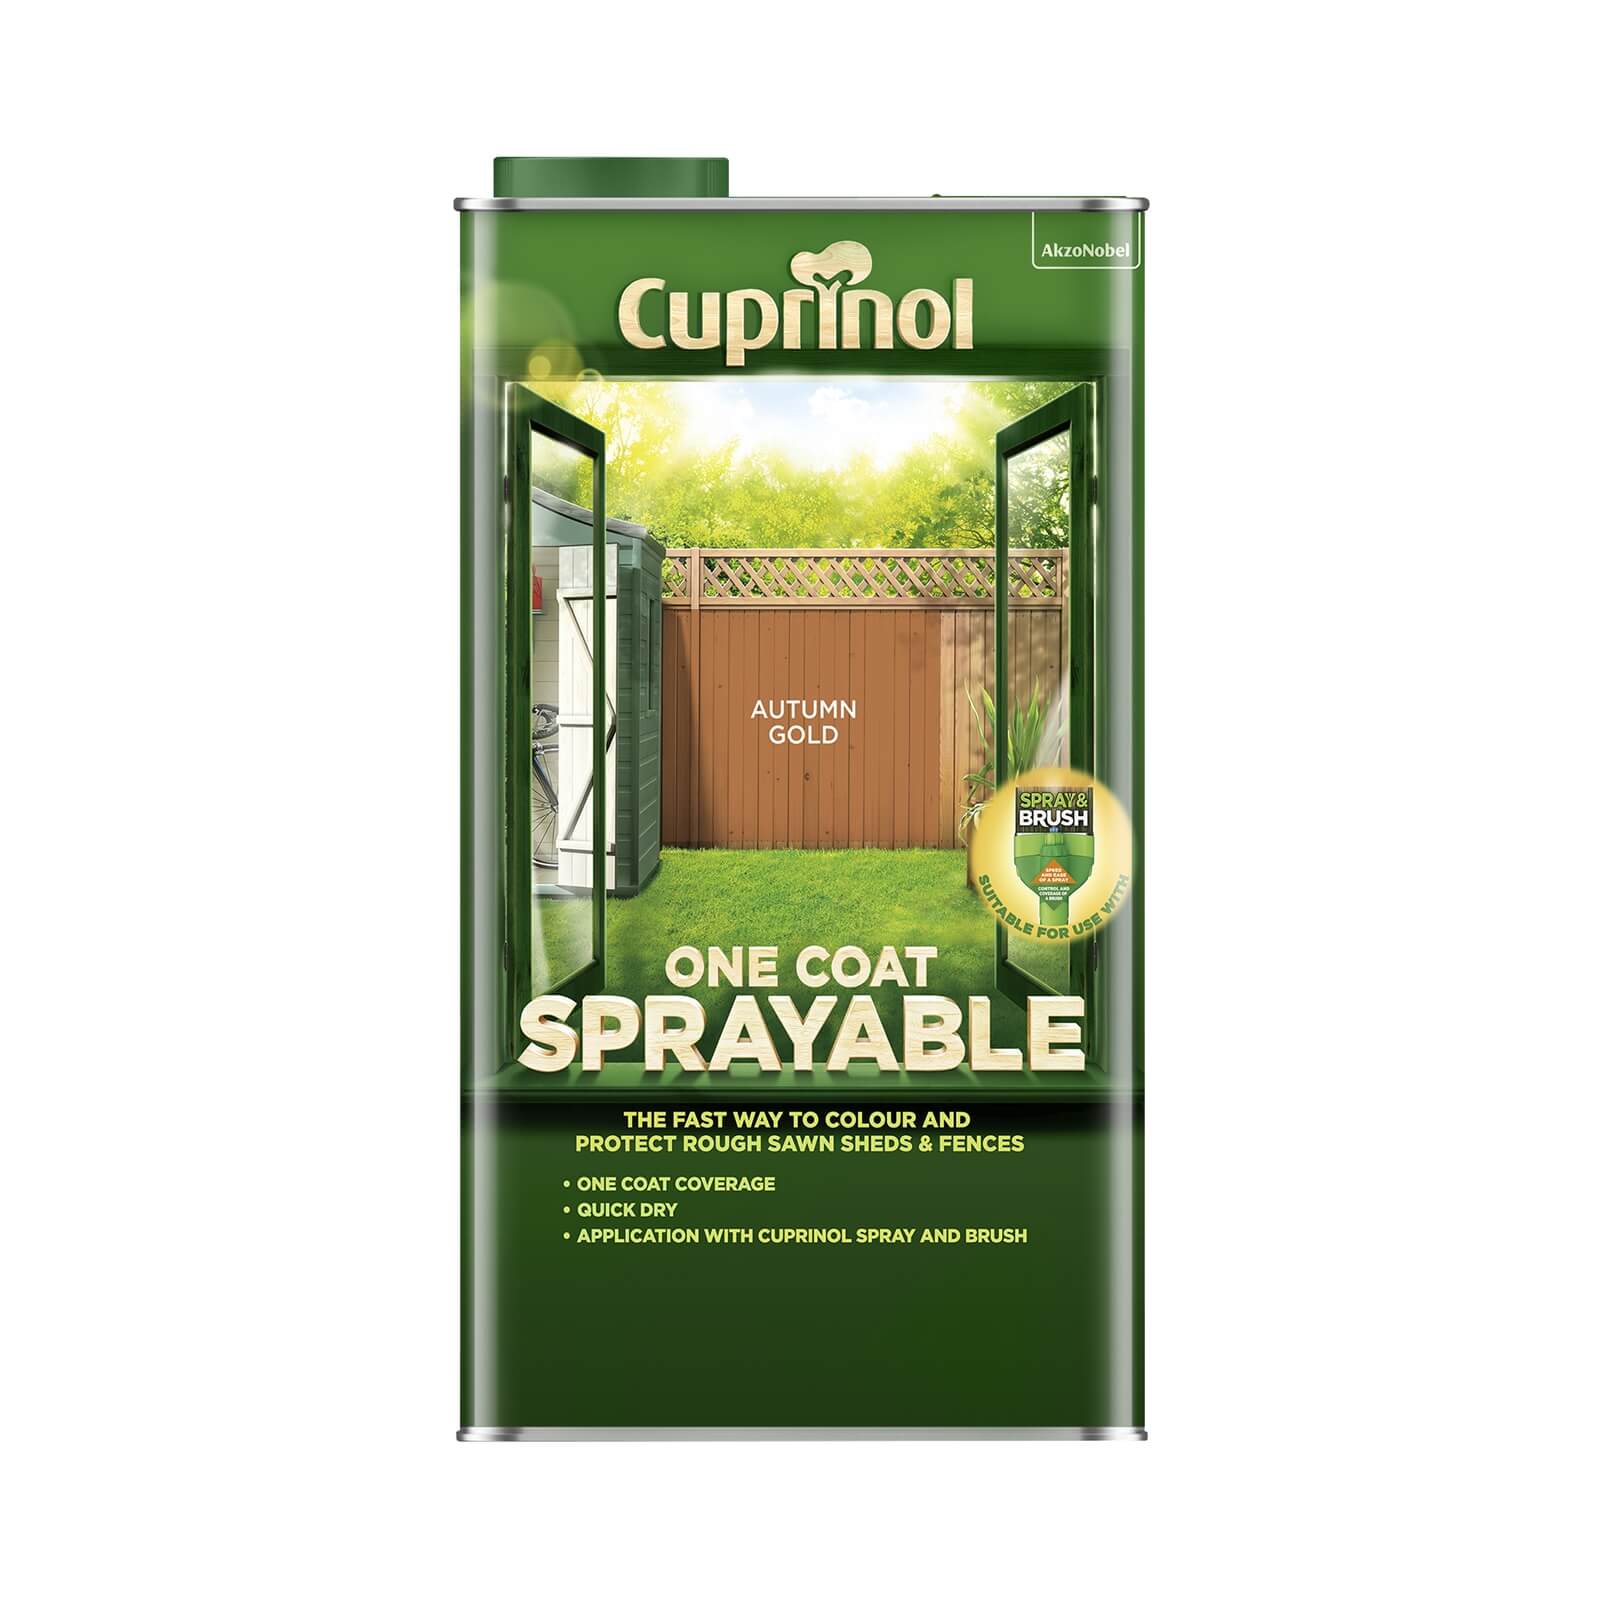 Photo of Cuprinol One Coat Sprayable Shed & Fence Paint - Autumn Gold - 5l